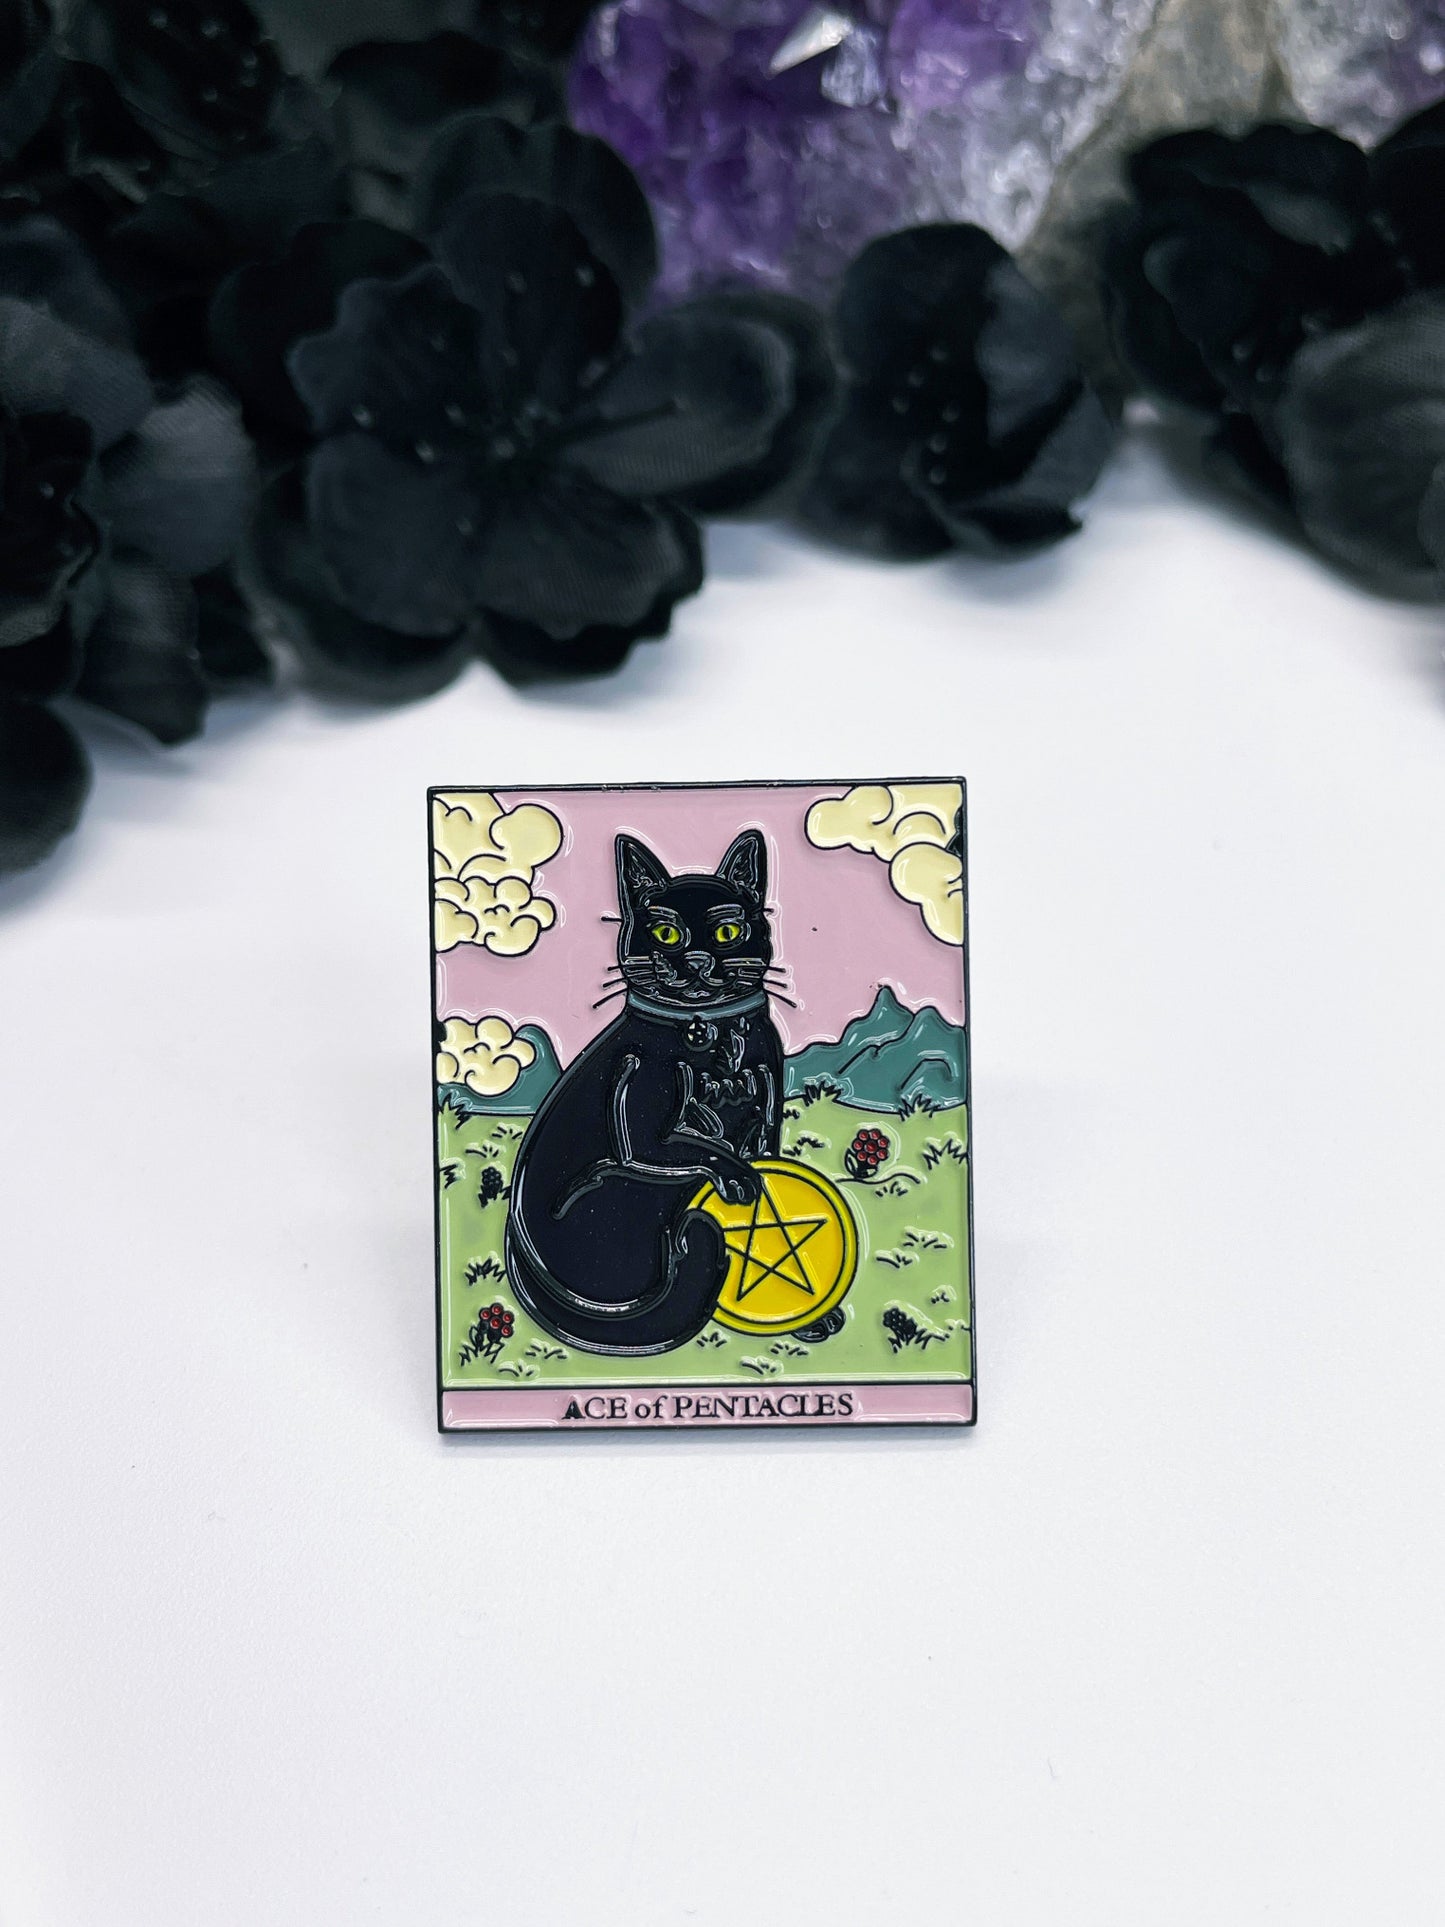 An image of an enamel pin featuring the Ace of Pentacles tarot card with a black cat perched on top of a golden coin. The card is depicted with intricate details and bright colors, including green leaves and pink flowers surrounding the coin. The words "Ace of Pentacles" are written in elegant script at the bottom of the card. The black cat, with its piercing yellow eyes and arched back, adds a touch of mystery and magic to the design. 